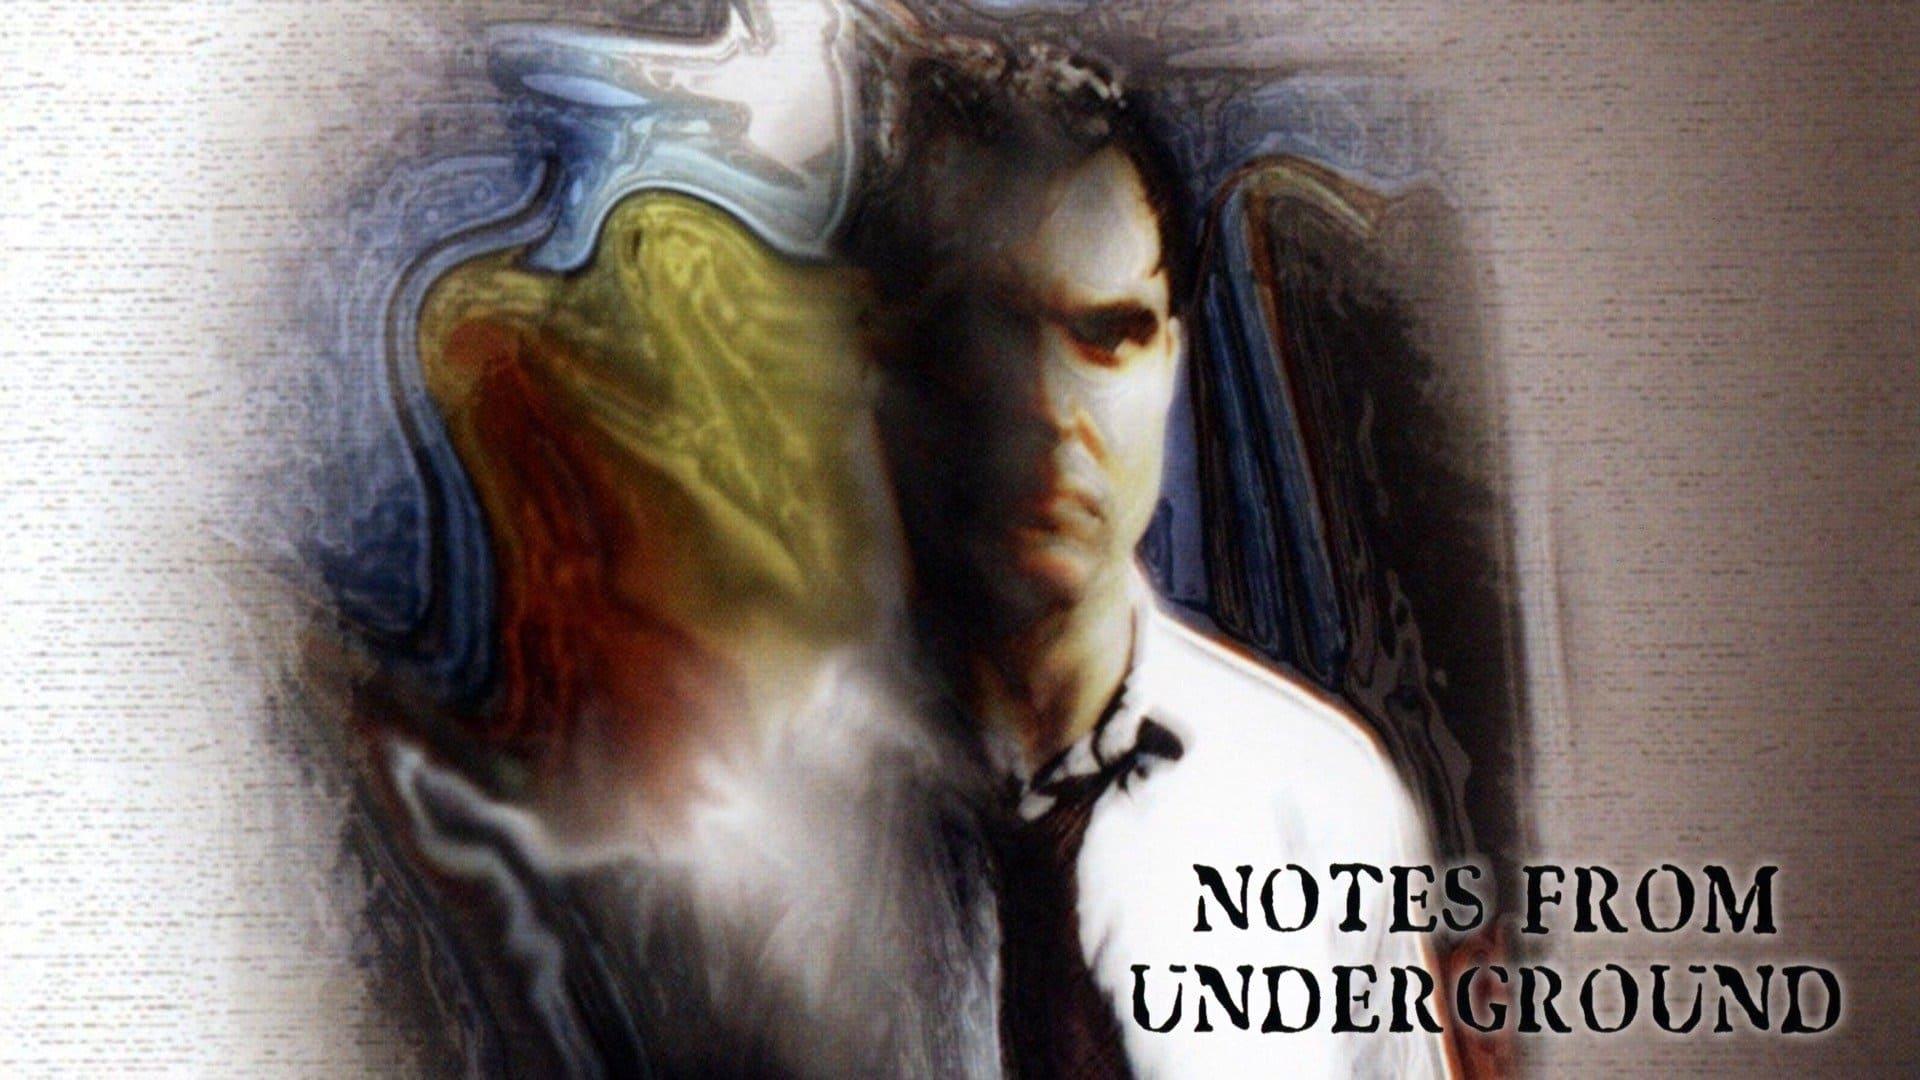 Notes from Underground backdrop